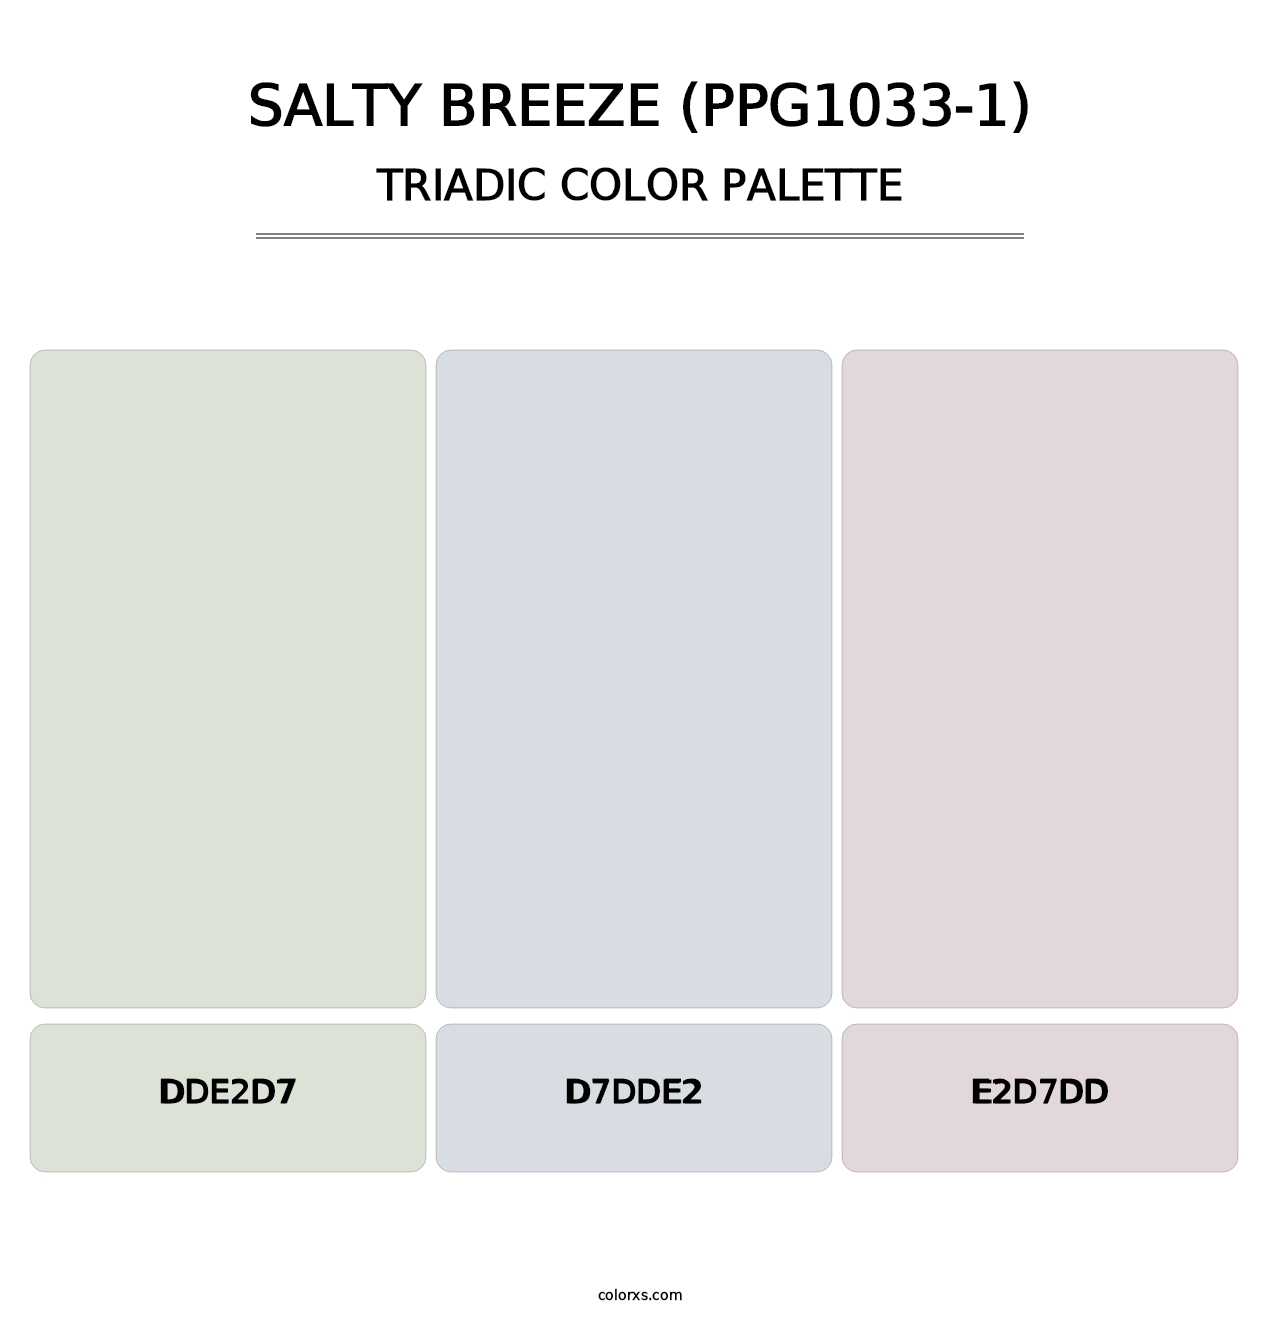 Salty Breeze (PPG1033-1) - Triadic Color Palette